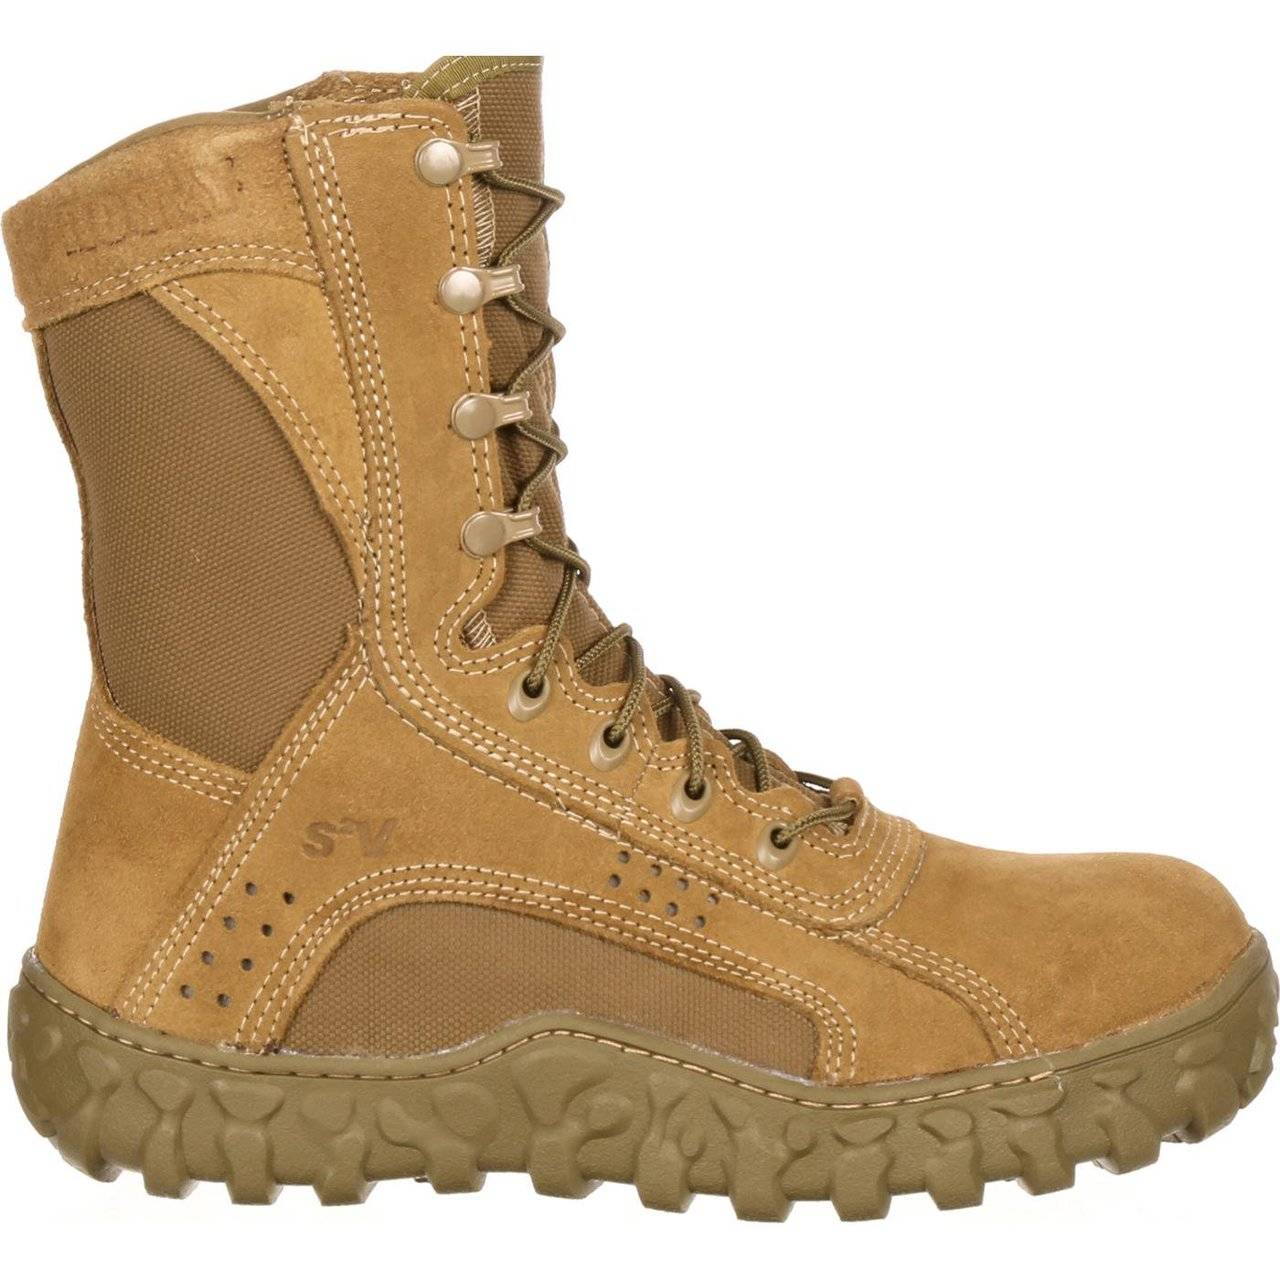 Rocky S2V Steel Toe Boots Military Boots